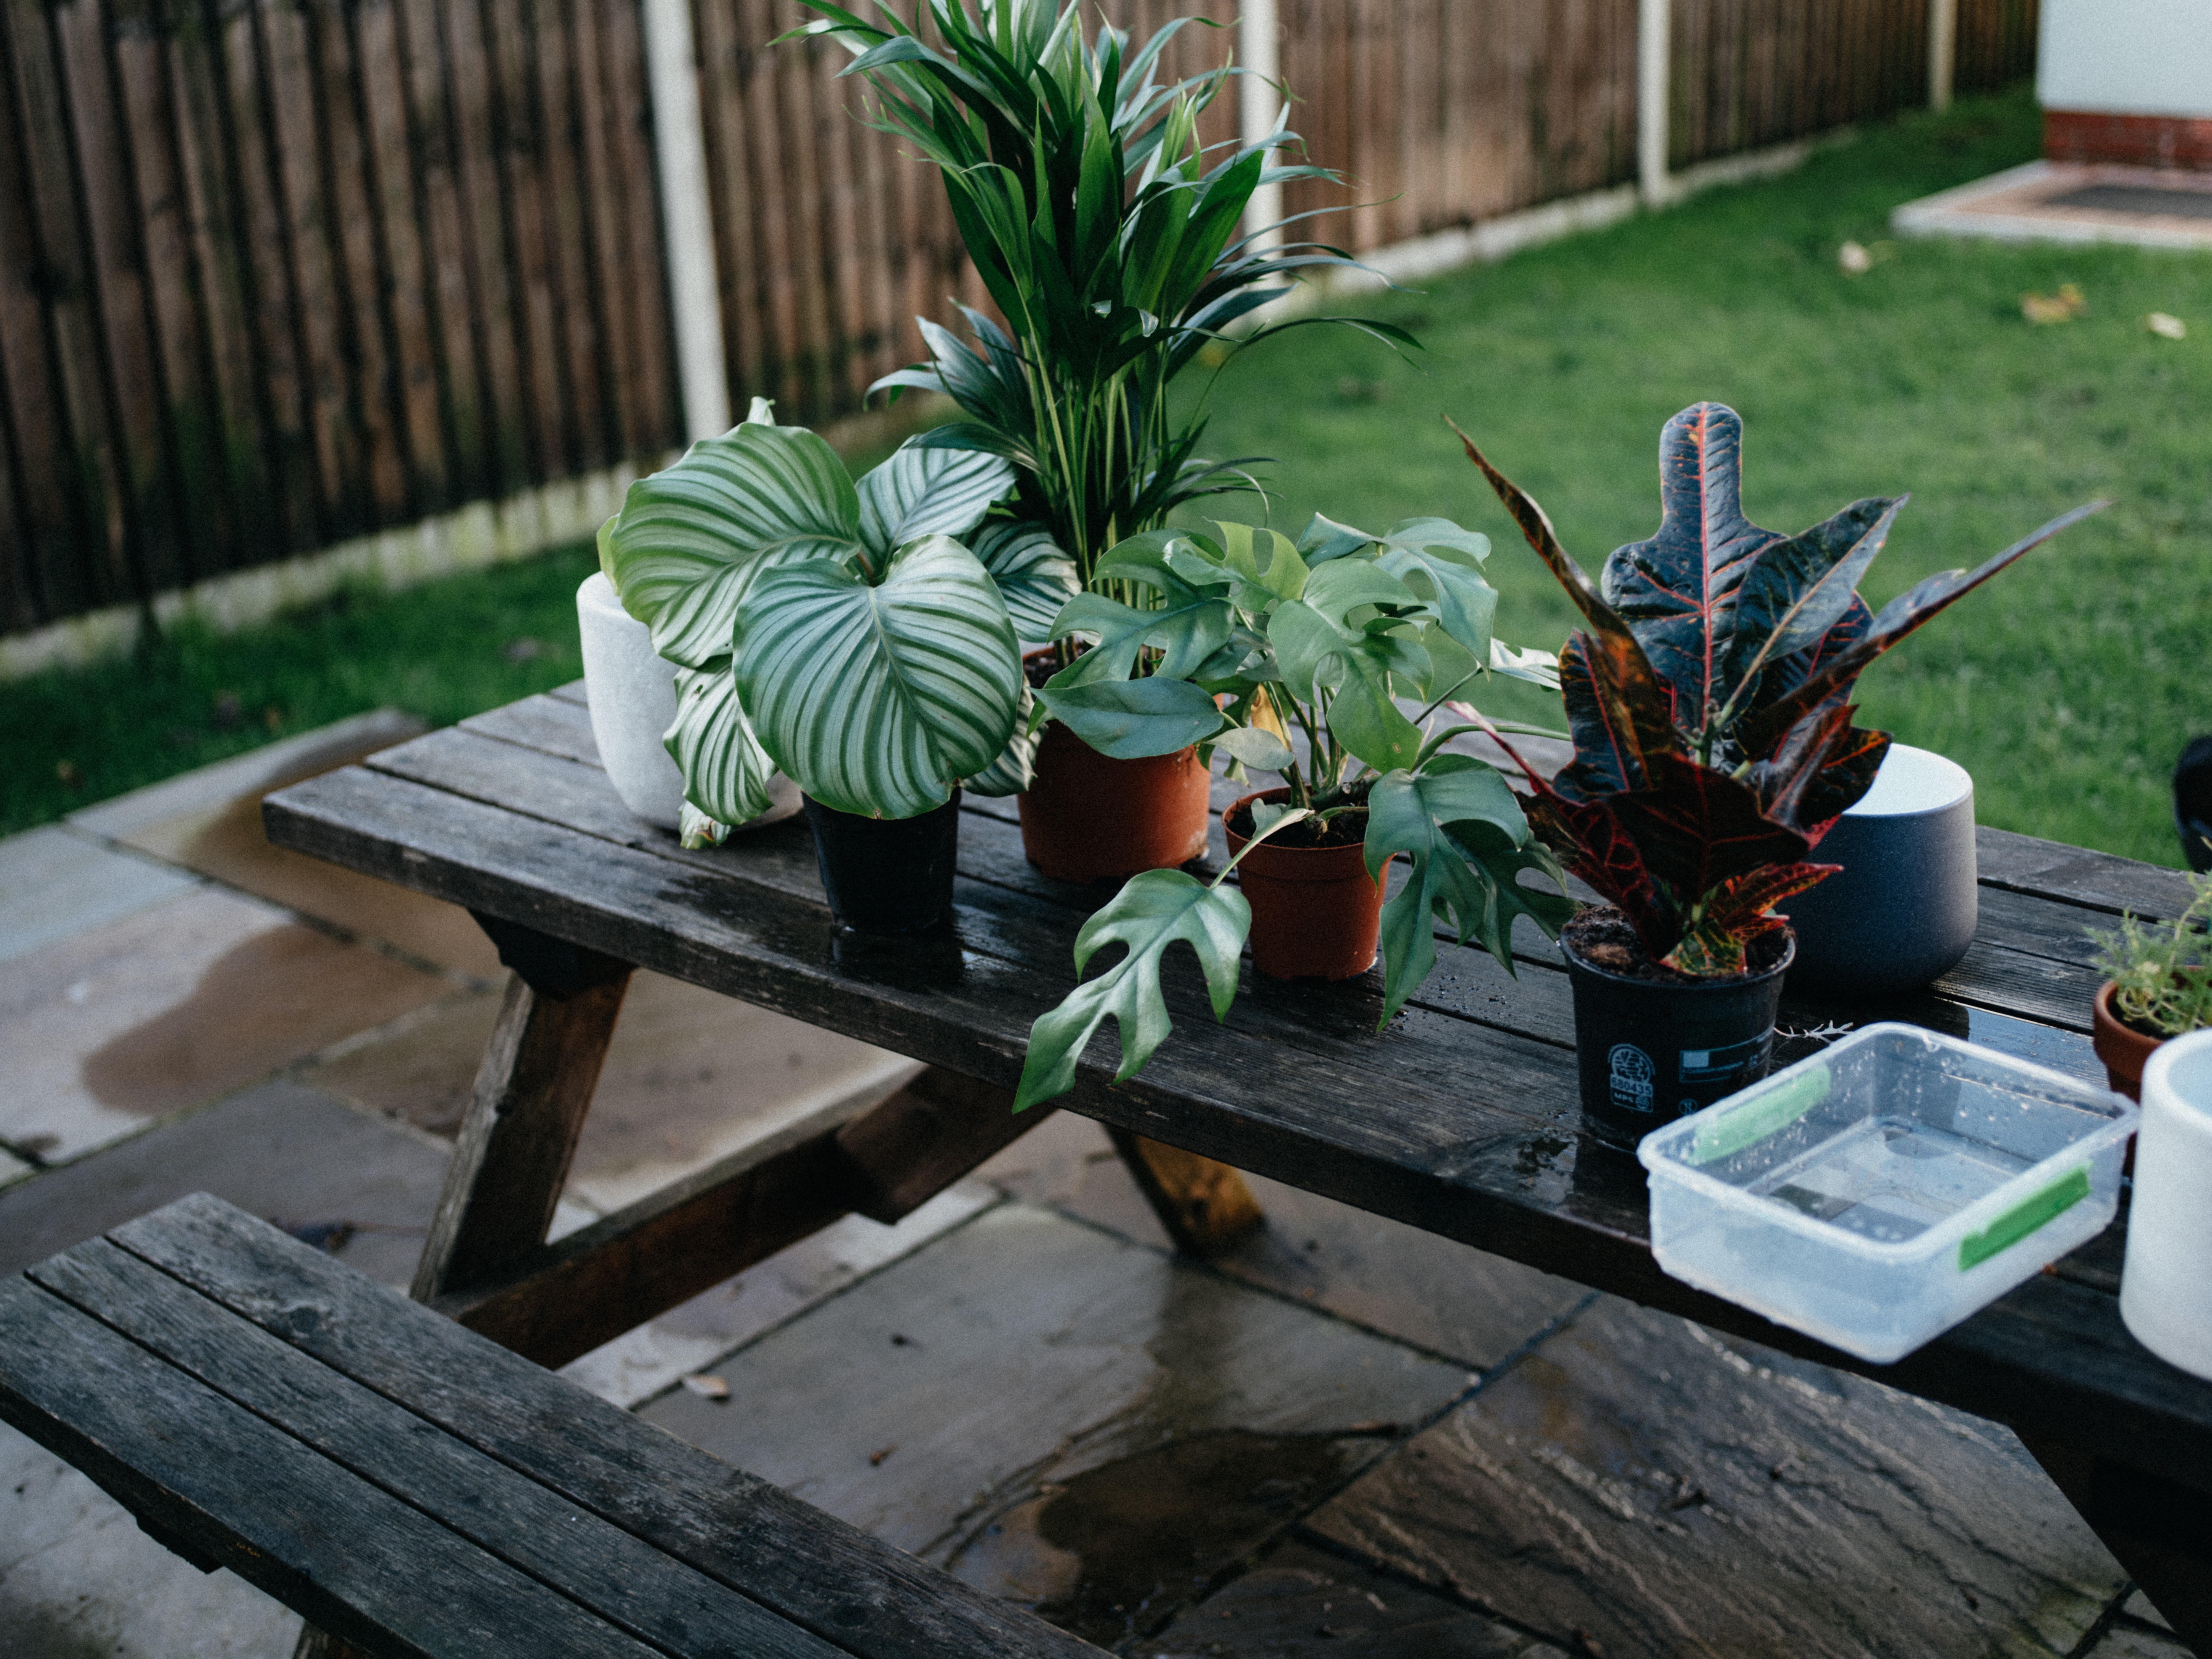 Is your plant truly thriving indoors?